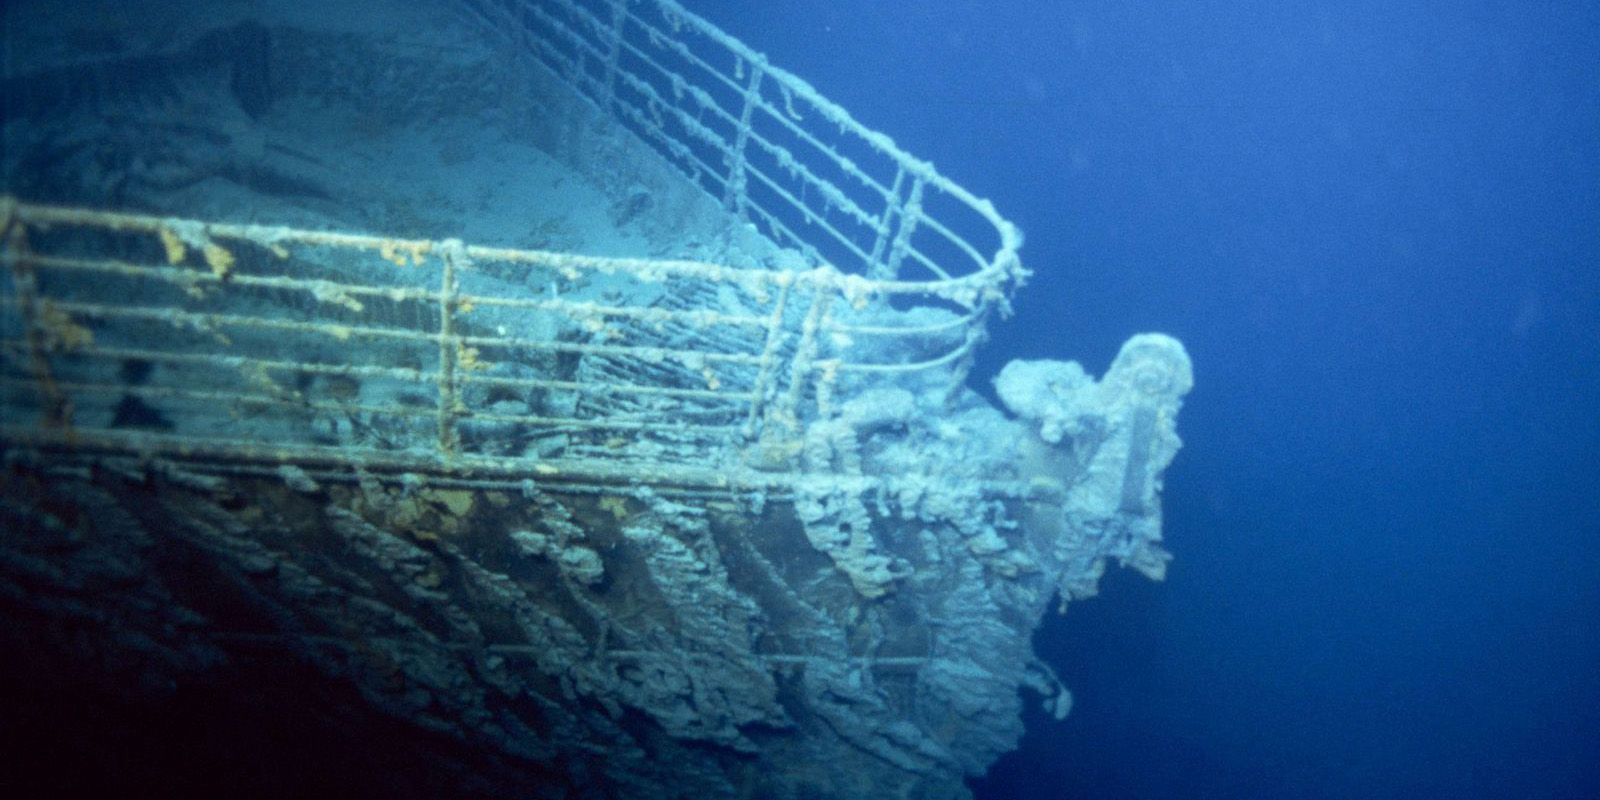 10 Questions About Titanic You’re Embarrassed To Ask (But May Be Wondering)